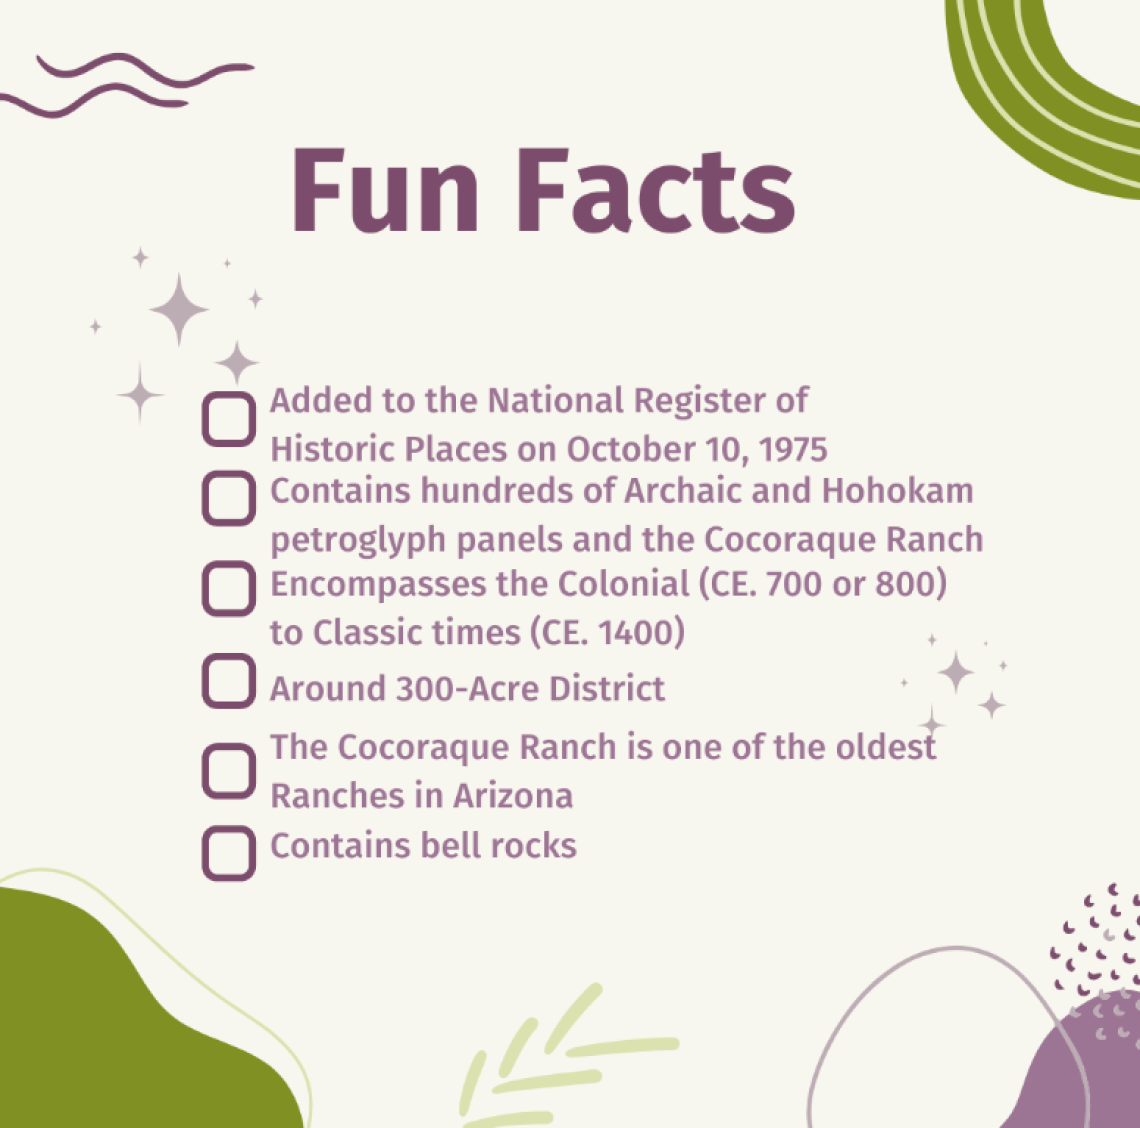 Fun facts to accompany the scavenger hunt social media post for Friends of Ironwood Forest National Monument